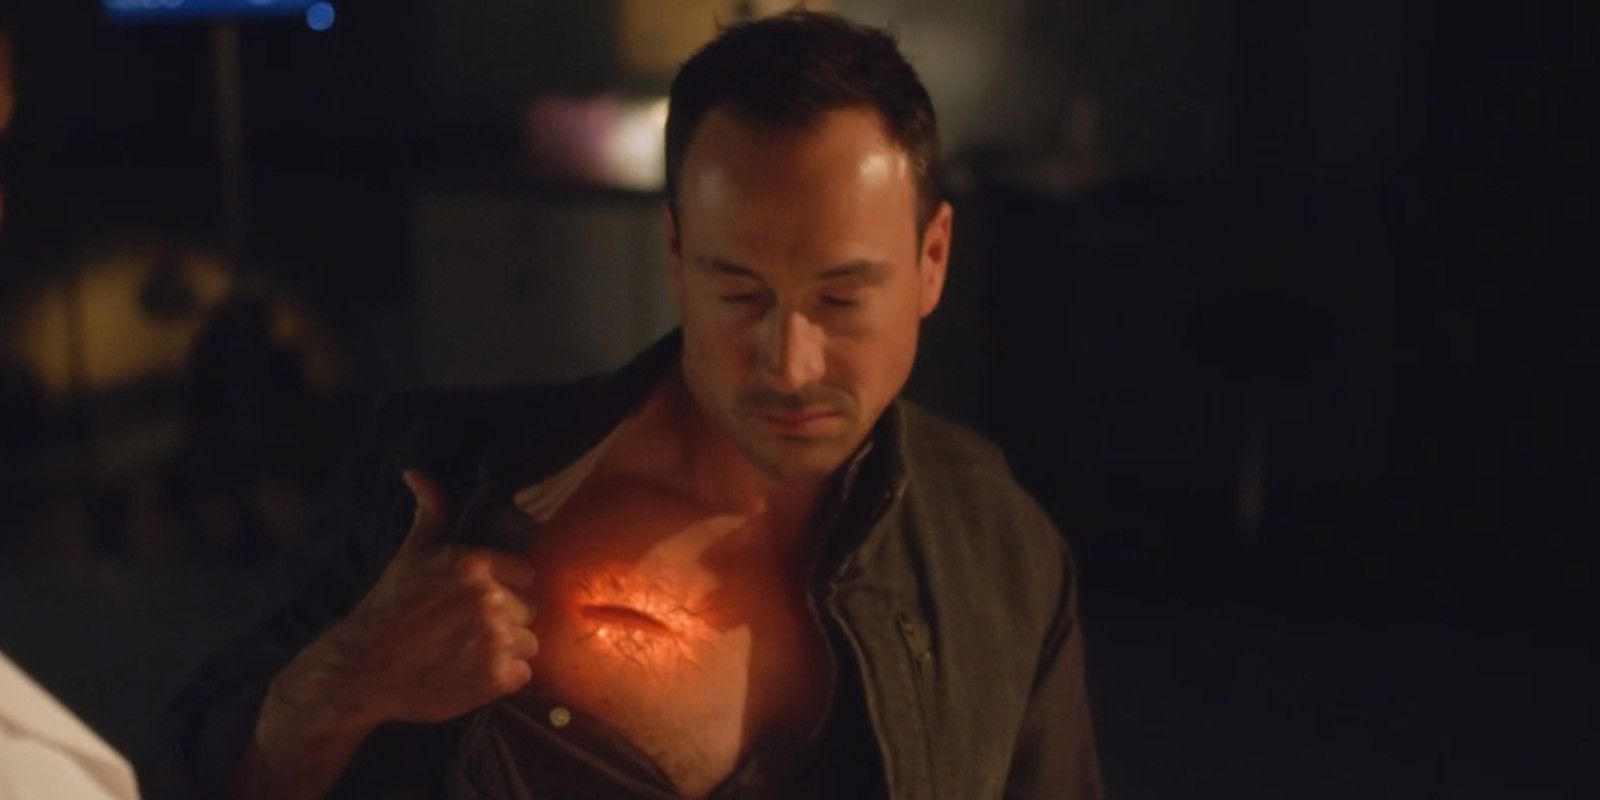 Cicada pulls back his shirt to reveal a wound in The Flash season 5